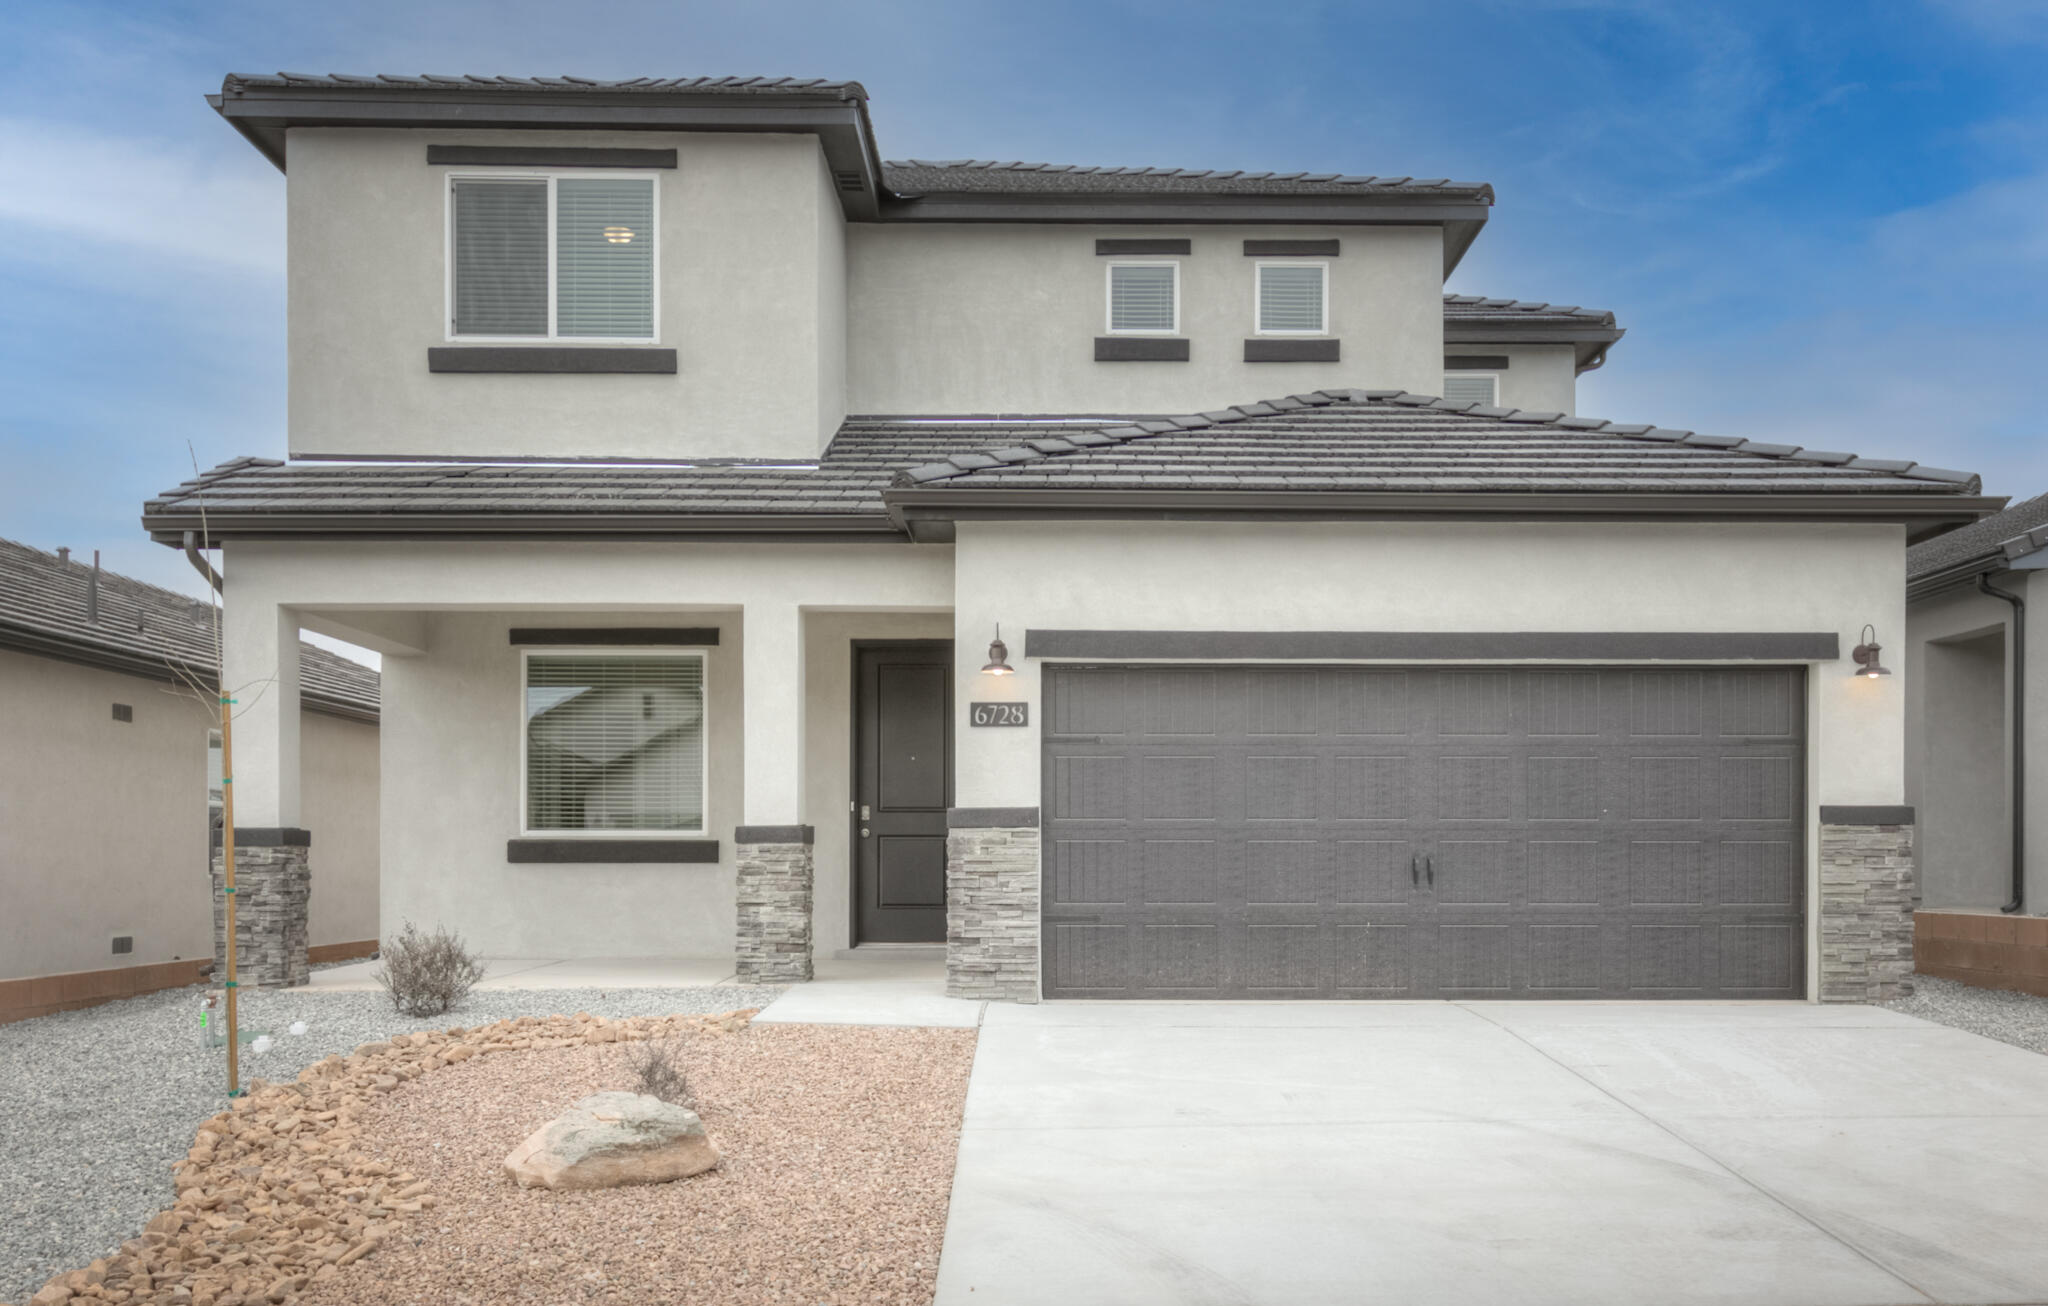 ASK ABOUT THE BUILDER INCENTIVES! Located at 340 Pinnacle Dr SE Rio Rancho you will find the Taos floorplan offered by Amreston Homes. Inside this 2354 Sqft Floorplan you will find 3 spacious bedrooms (including one of the largest Owners Suites Amreston has to offer 22.5x13.5), an office, and 2.5 Baths. The lower level of this floorplan is perfect for entertaining. Each space flows to the next and includes a 1/2 bath to ensure personal privacy upstairs. All the standard features are sure to impress which include: 12x24 tile, Tiled showers to the ceiling, Granite, Stainless appliances including the fridge, and more! This home is under construction and some photos are not of the exact home, but rather examples of the floorplan and finish work of the builder. Finished product may vary ba